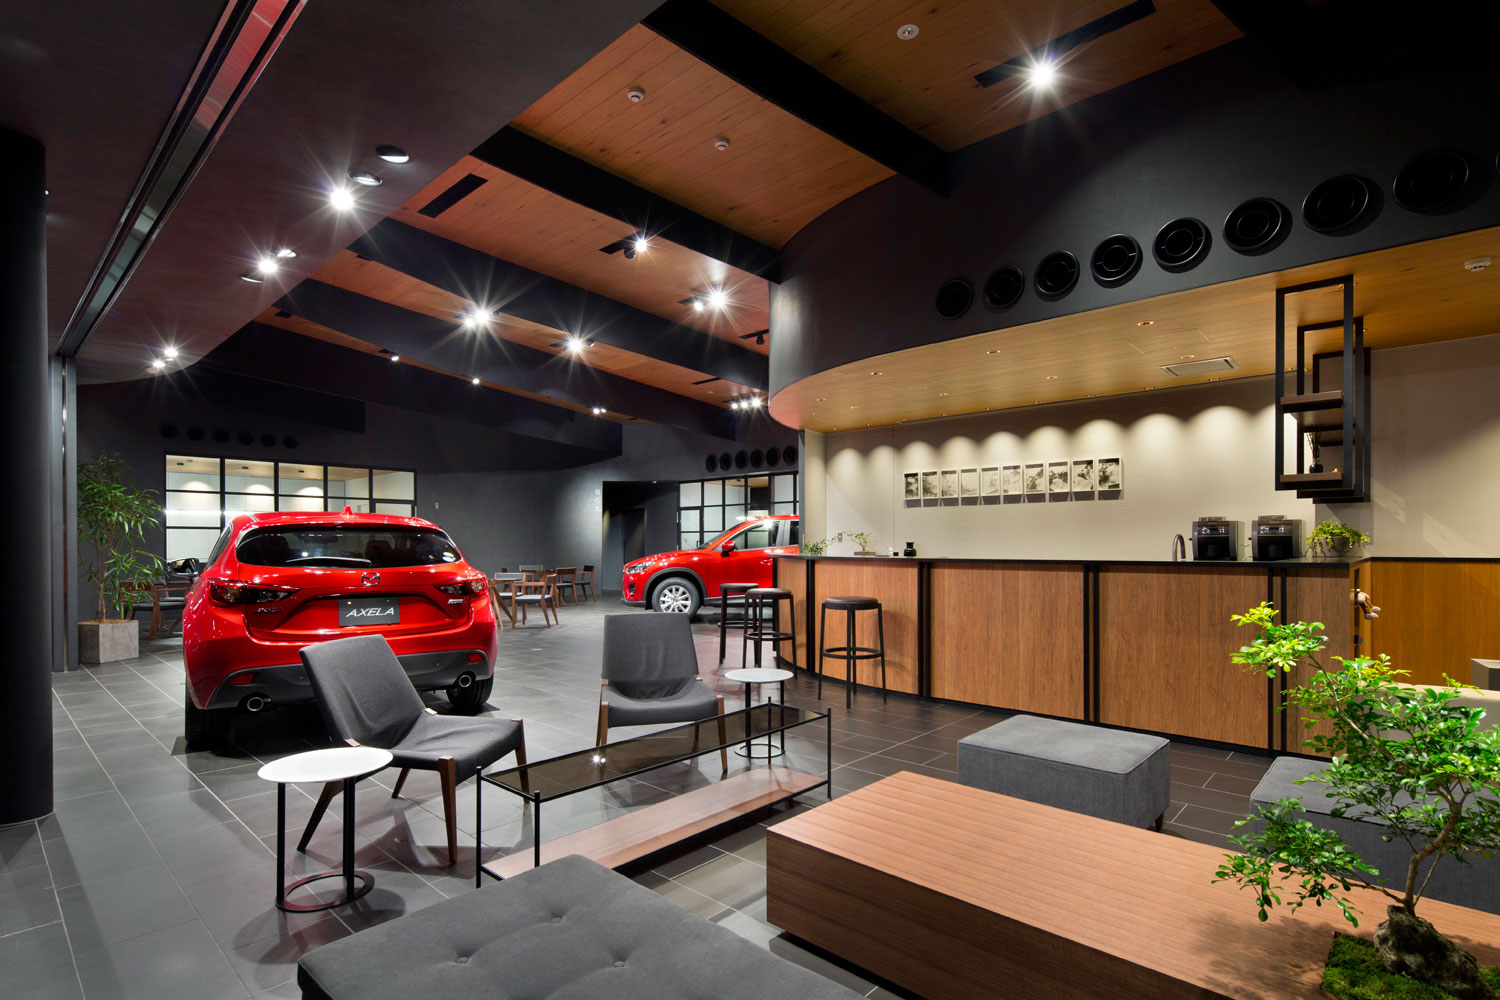 Sometimes used cars are purchased from individuals rather than dealerships, which can require more of the buyer’s participation in the process of transferring the ti. Mazda Showroom in Meguro | Leibal